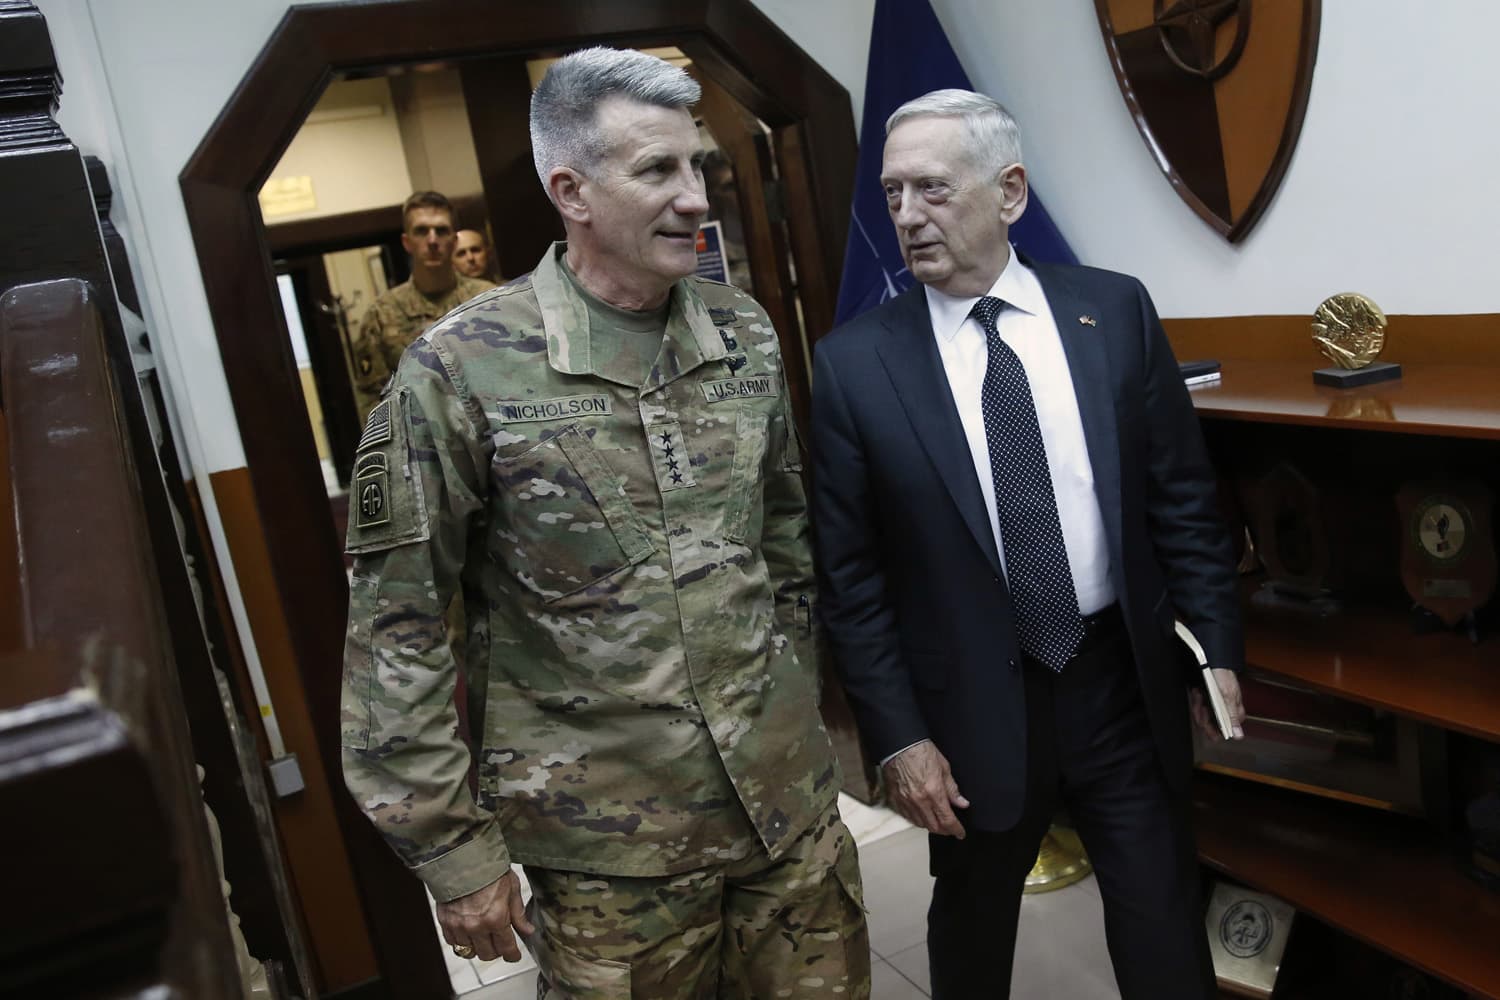 U.S. Defense Secretary James Mattis, right, and U.S. Army General John Nicholson, left, commander of U.S. Forces Afghanistan, arrive to meet with an Afghan defense delegation at Resolute Support headquarters, in Kabul Afghanistan, Monday, April 24, 2017. Mattis arrived unannounced in Afghanistan to assess America's longest war as the Trump administration weighs sending more U.S. troops. (Jonathan Ernst/AP)